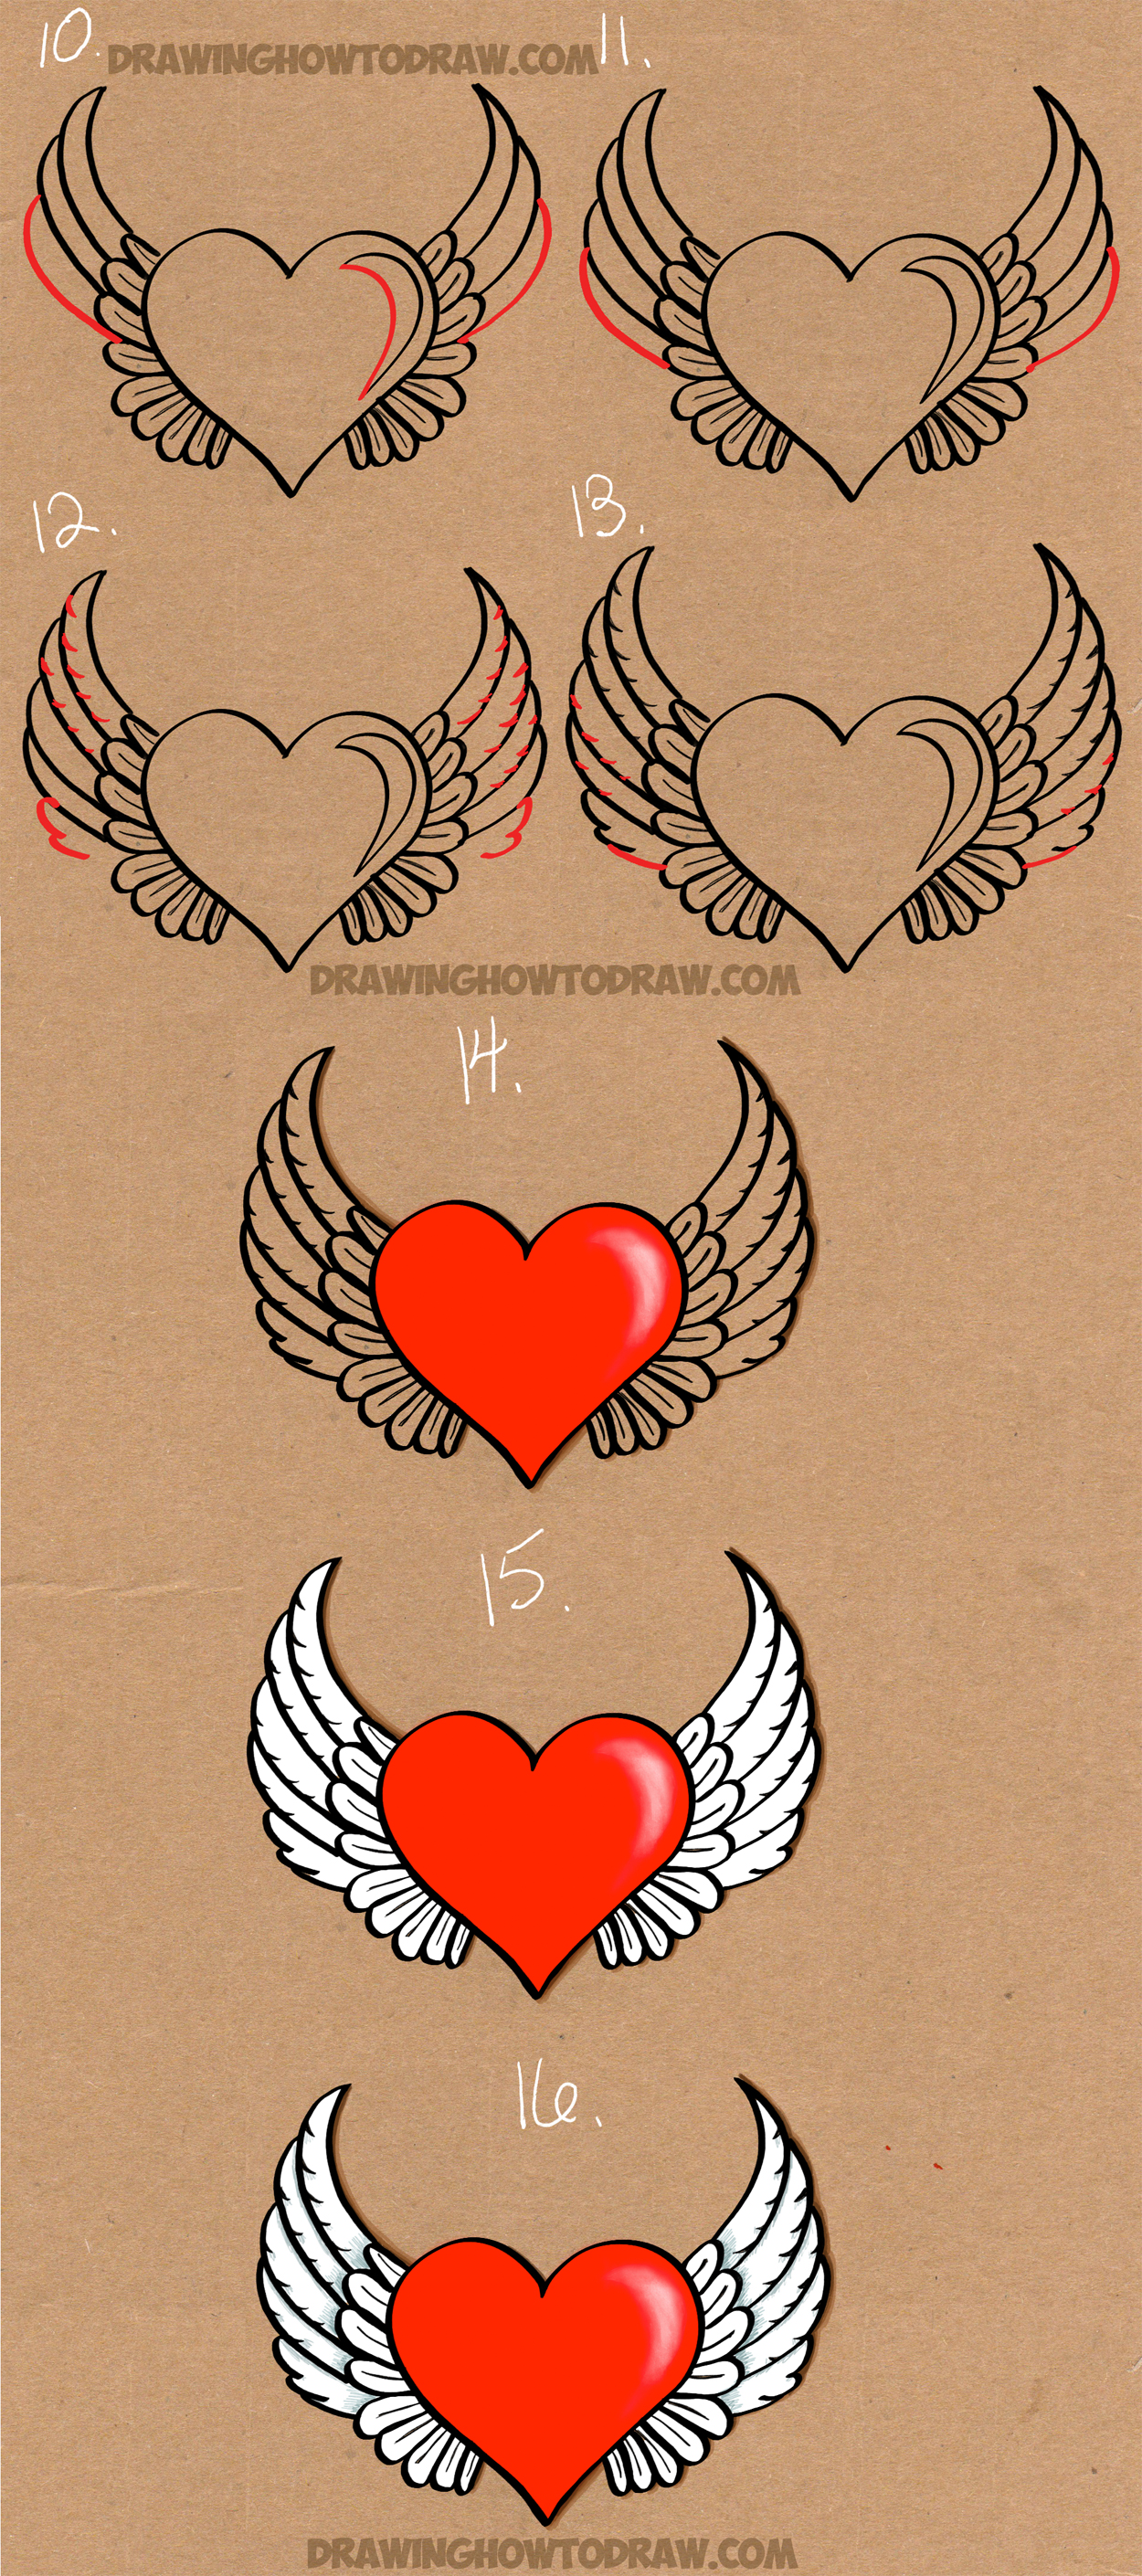 How to Draw a Heart with Wings Easy Step by Step Drawing Tutorial